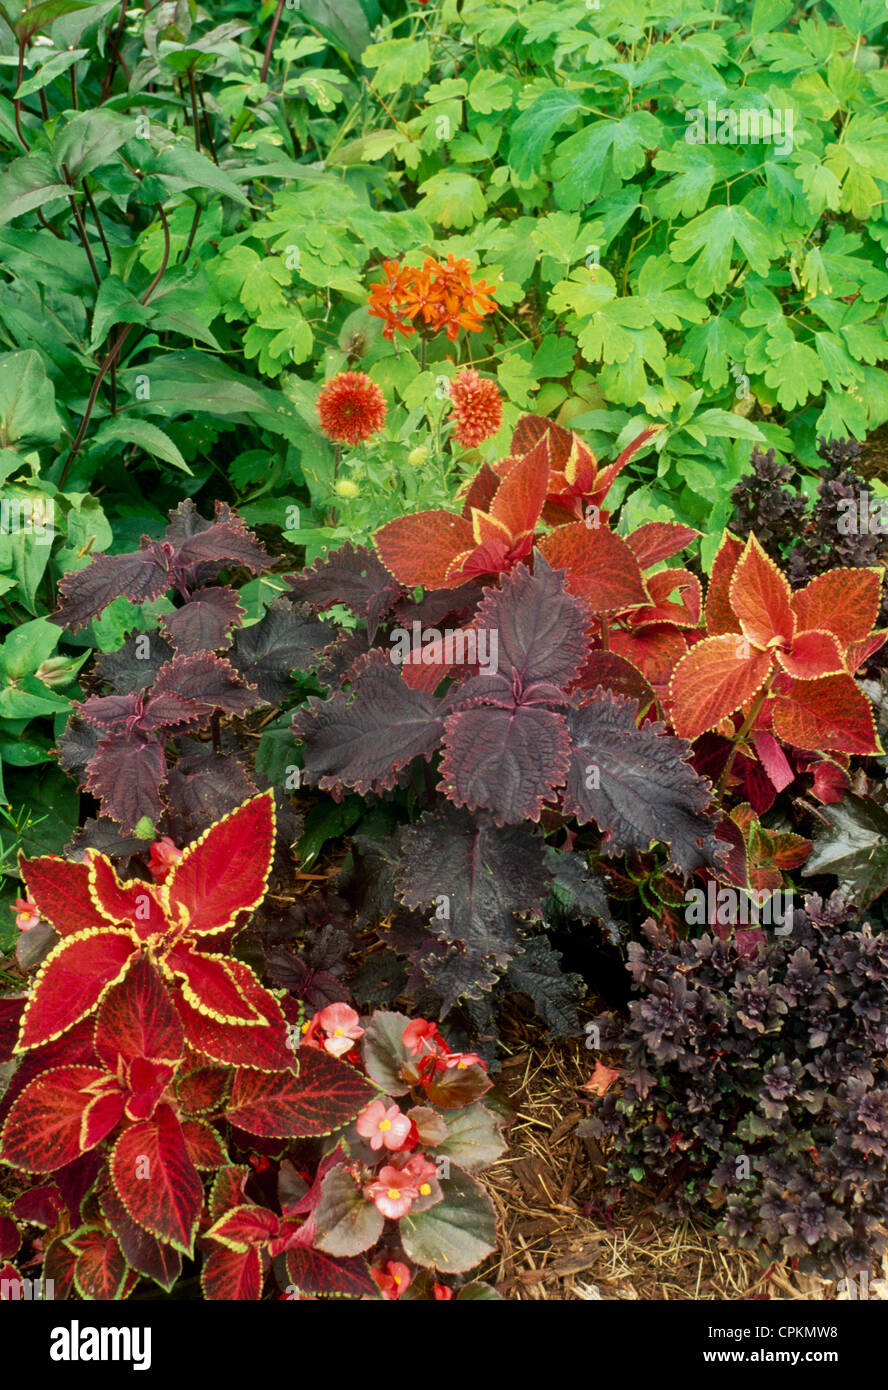 Mixed orange and brown-red Coleus plants with begonia for a colorful and color co-ordinated garden, Missouri USA Stock Photo